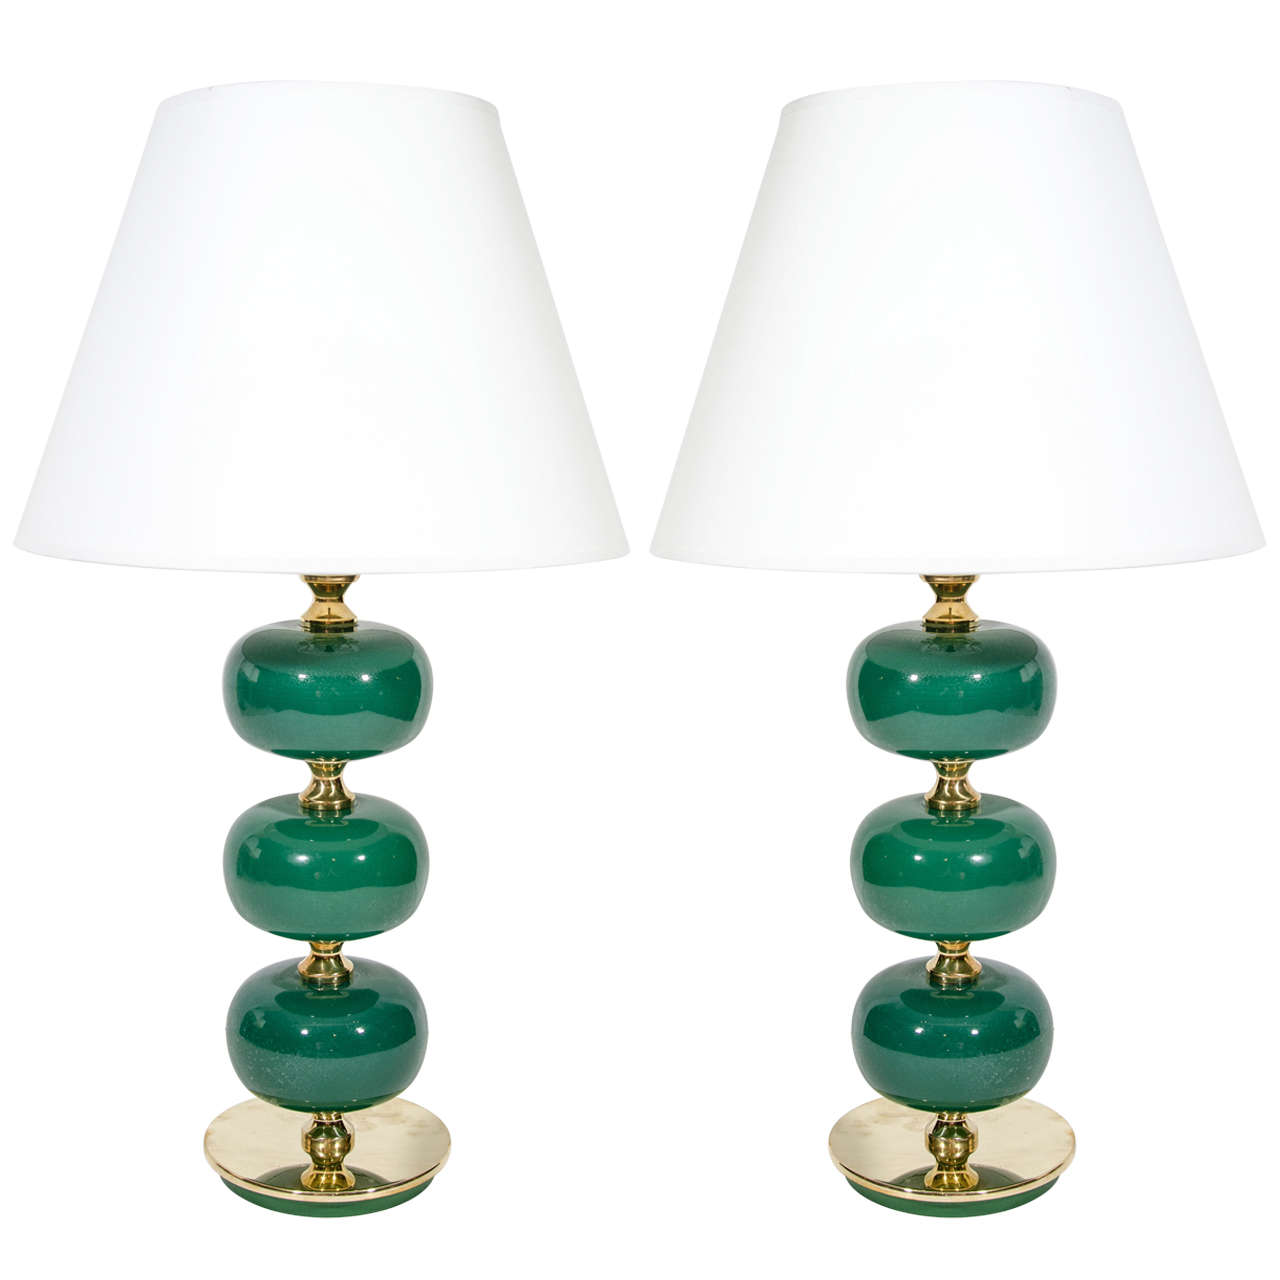 A Pair of Swedish Vintage Glass Lamps, 1960s/70s